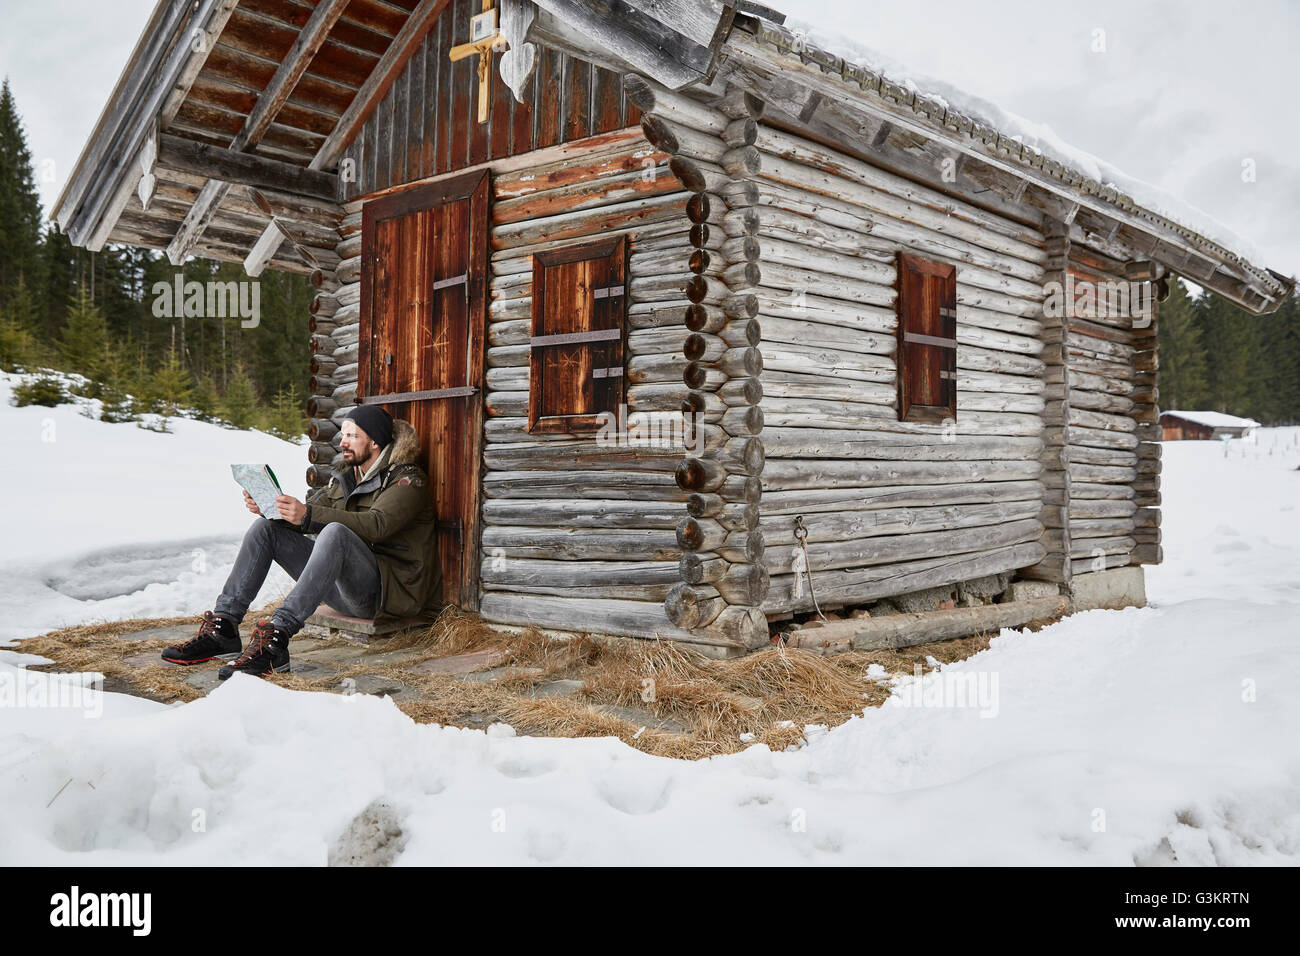 Young man reading map sitting outside log cabin in winter, Elmau, Bavaria, Germany Stock Photo